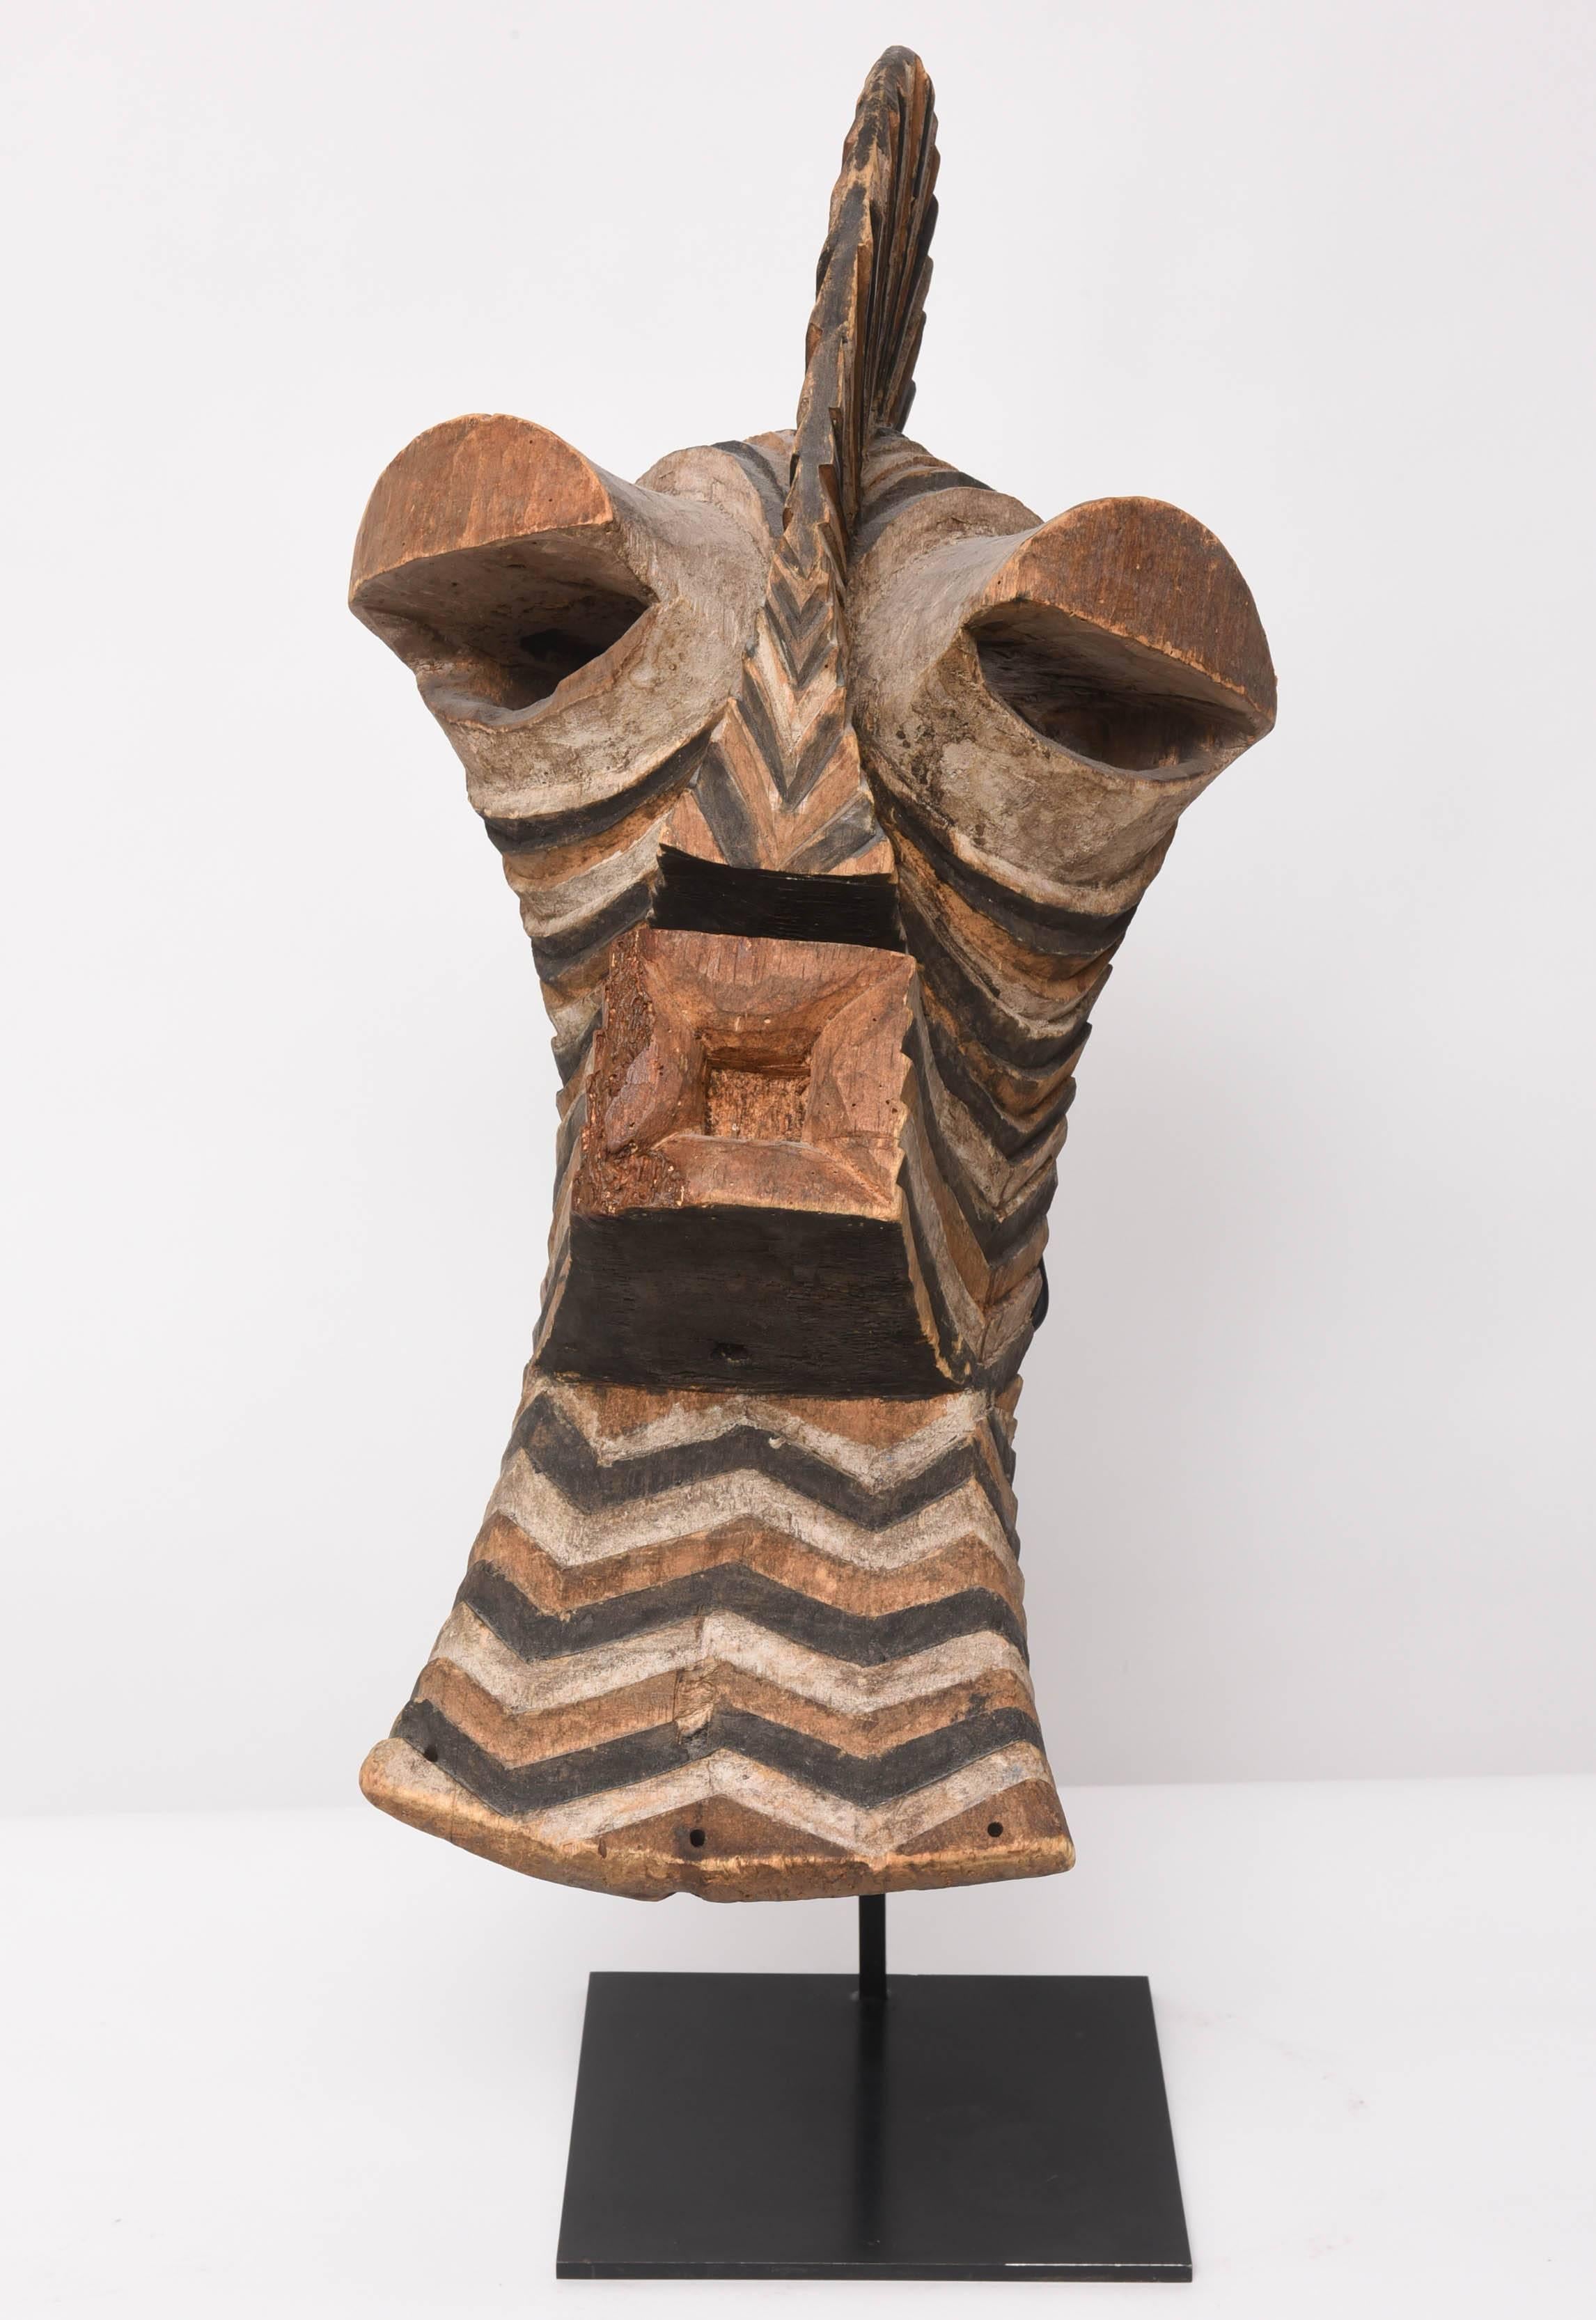 This 19th century large carved wooden mask with a chevron-pattern colored in ochre, white and black pigments, in the style of a ceremonial Kifwebe, of the Songye People, a Bantu ethnic group from the central Democratic Republic of Congo. Similar to